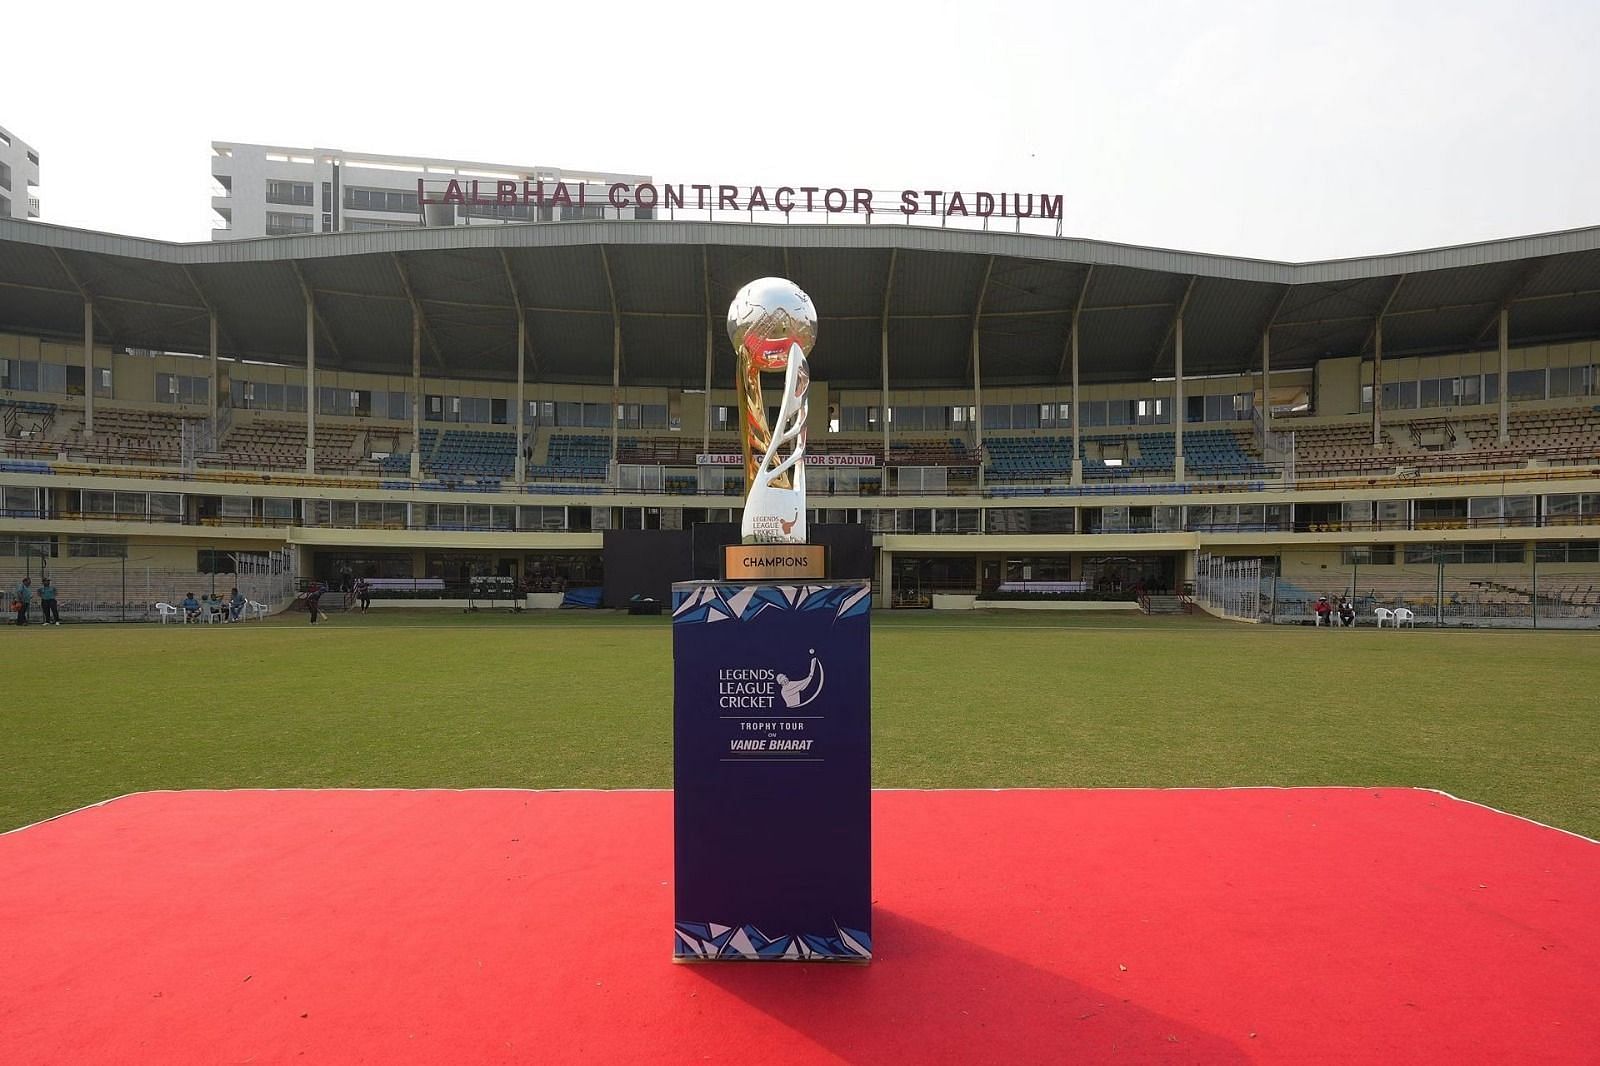 Legends League Cricket 2023 Trophy at Lalabhai Contractor Stadium in Surat (credits: X / llcT20)